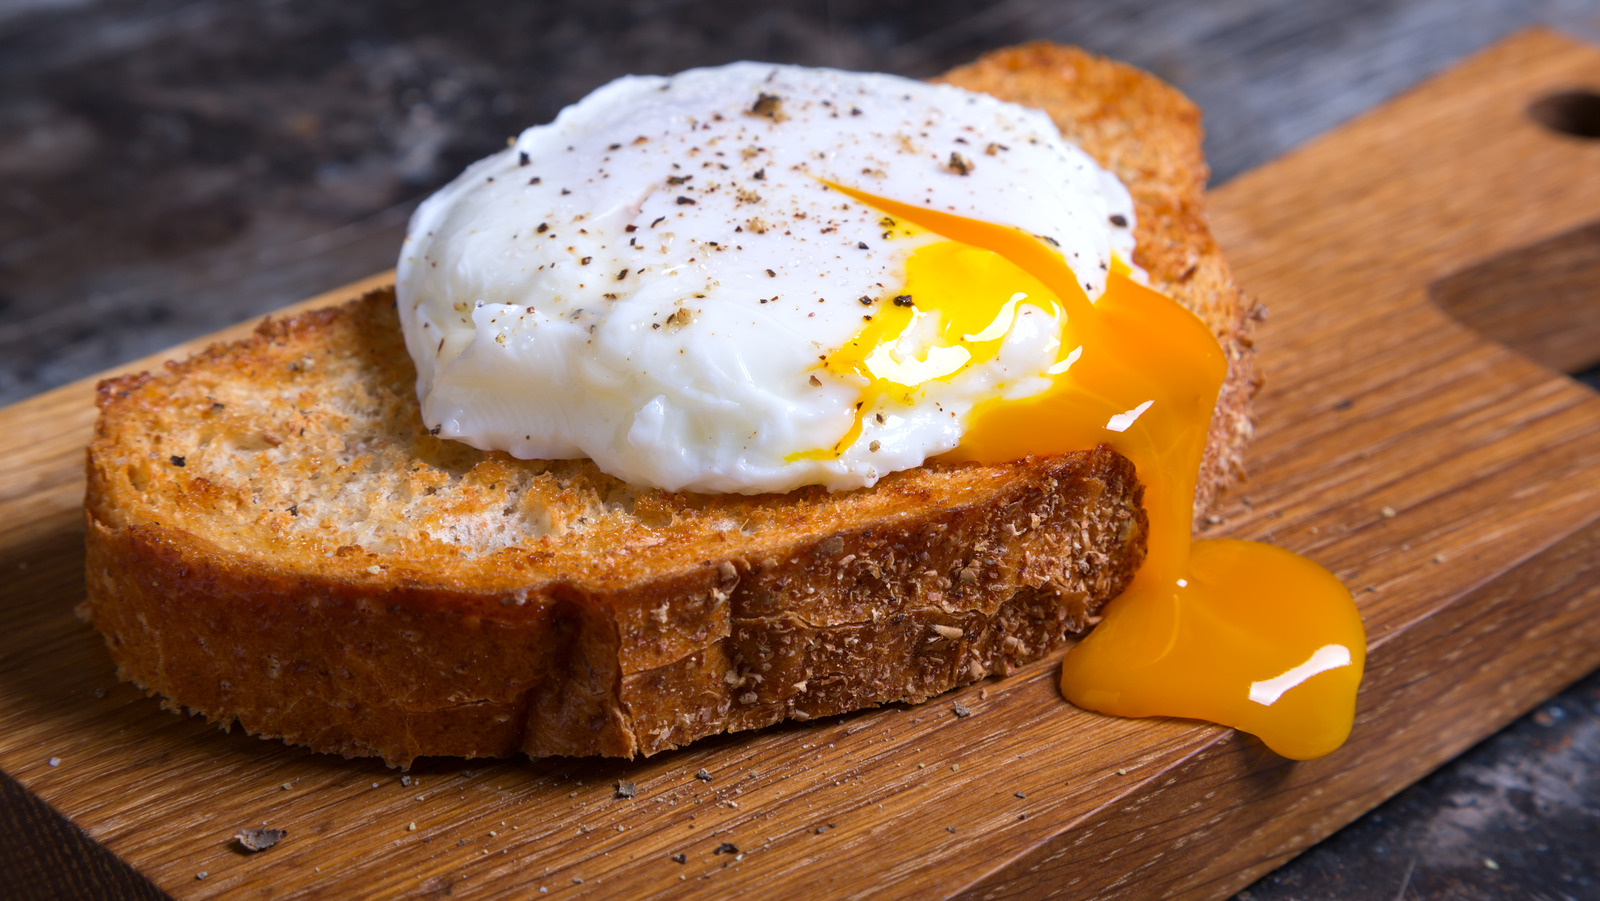 14 Common Mistakes You're Probably Making When Poaching Eggs,
According To The American Egg Board